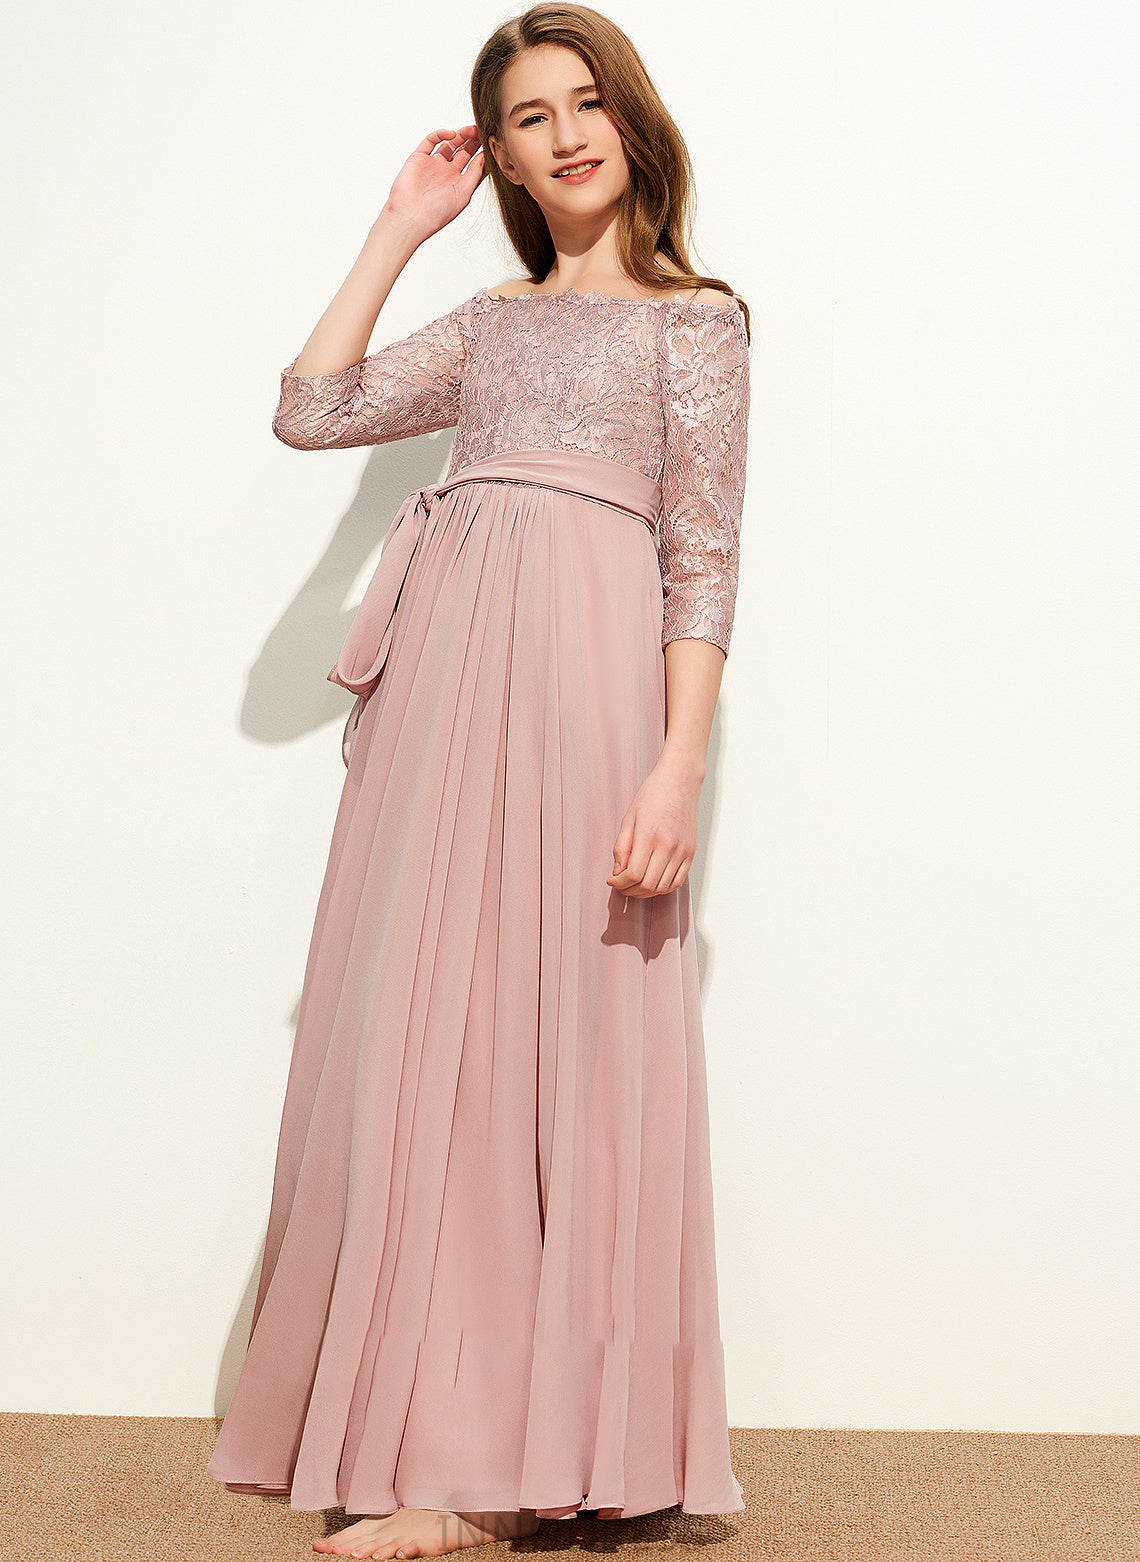 A-Line Off-the-Shoulder Rylie Bow(s) Lace Junior Bridesmaid Dresses Chiffon Floor-Length With